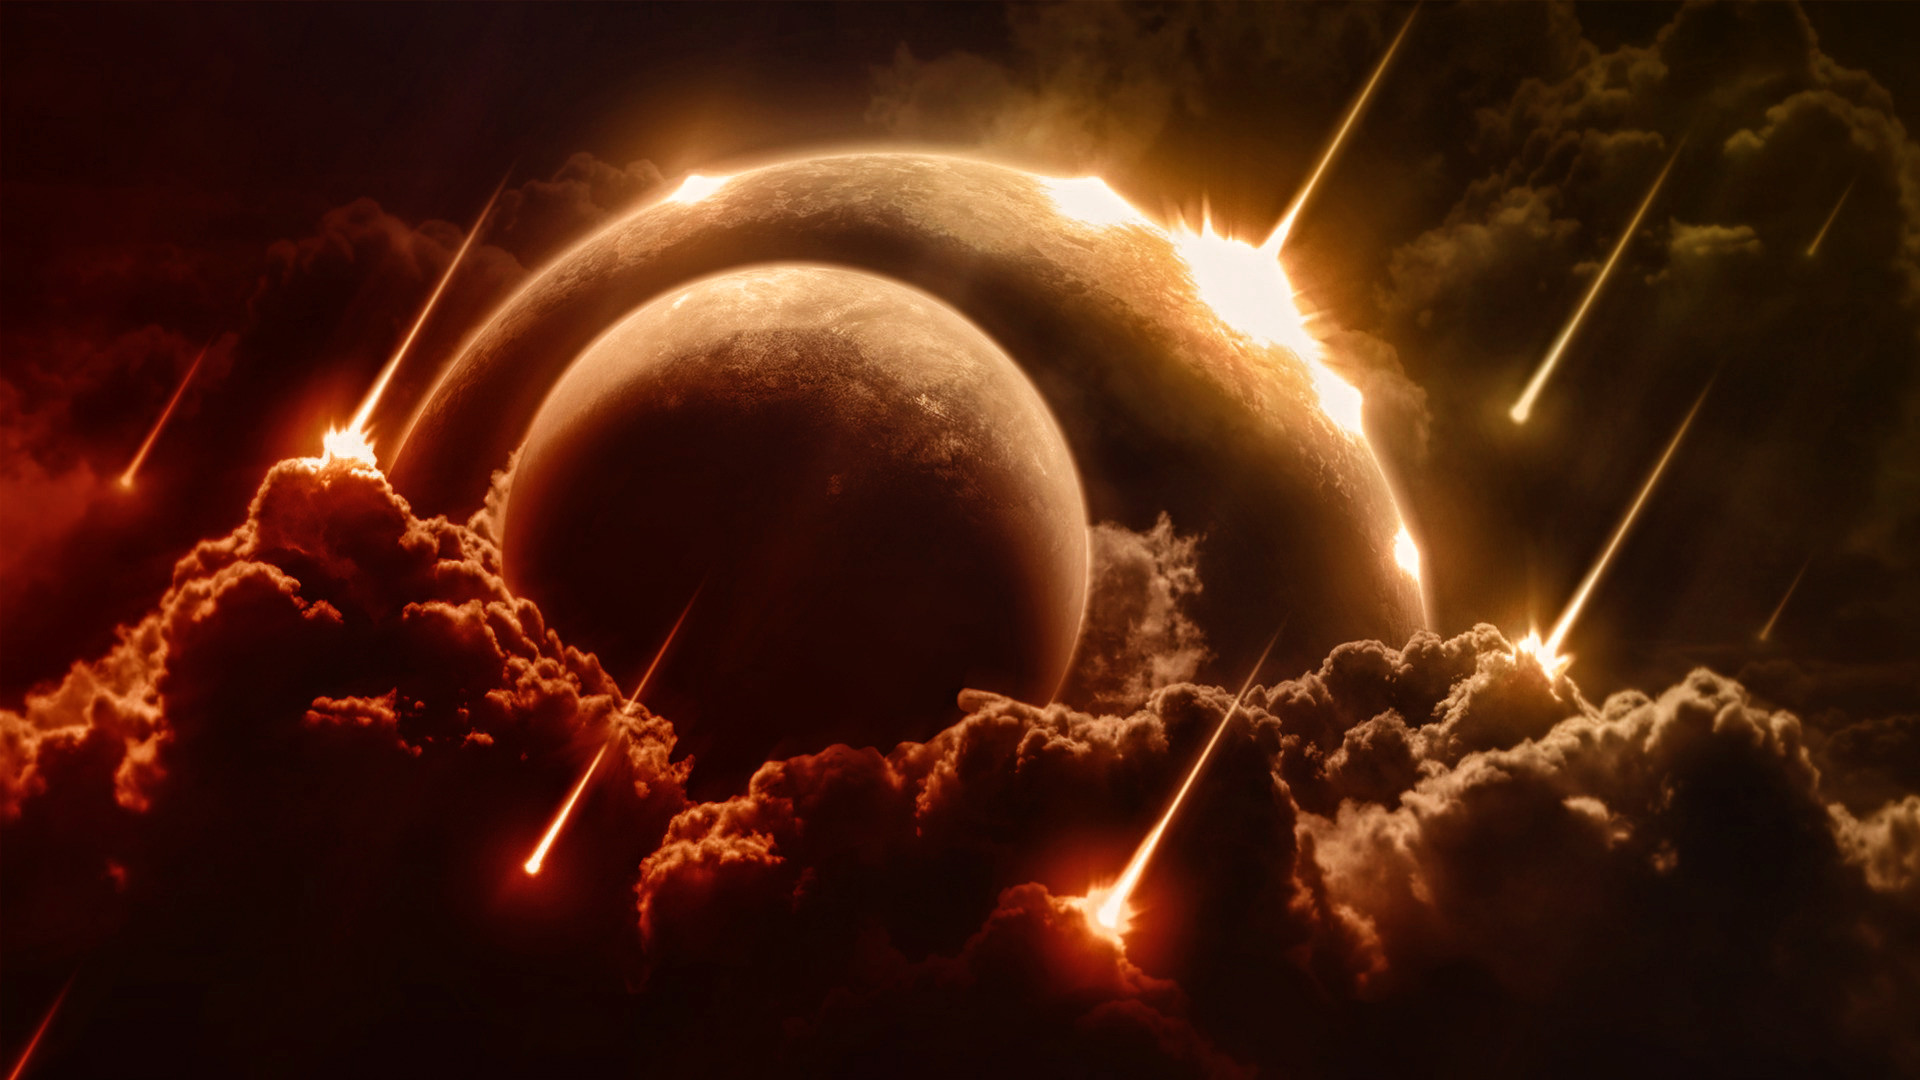 Hd Photos, Amazing, Wallpaper, Desktop Images, Free - Two Steps From Hell Starfall - HD Wallpaper 